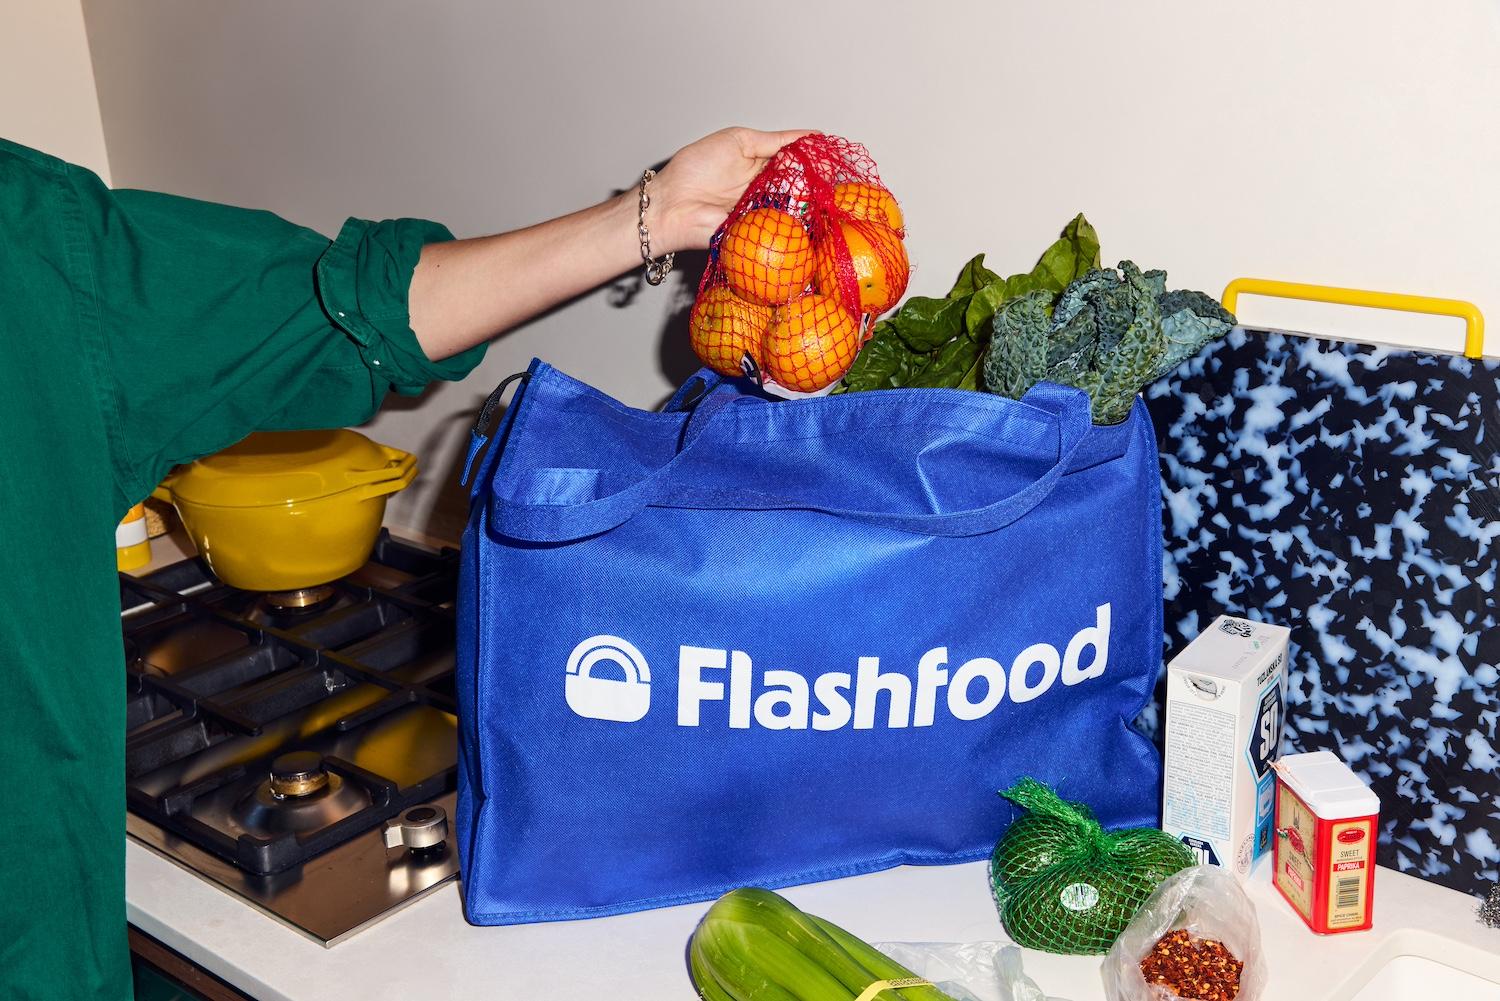 A person grabbing produce out of a bag from the food waste app Flashfood.